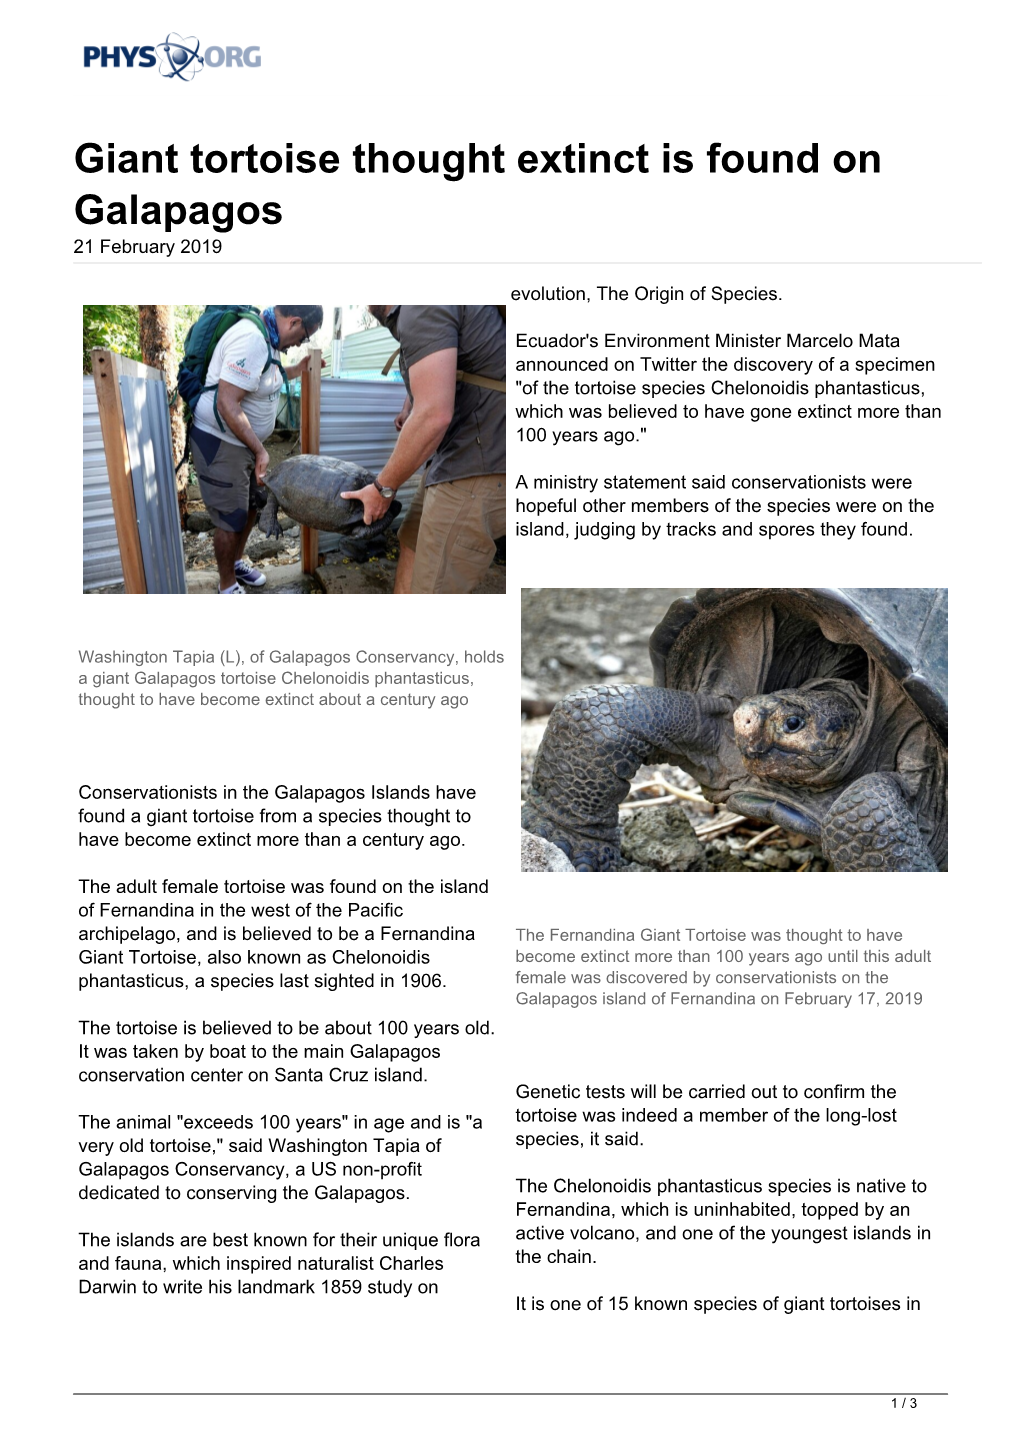 Giant Tortoise Thought Extinct Is Found on Galapagos 21 February 2019